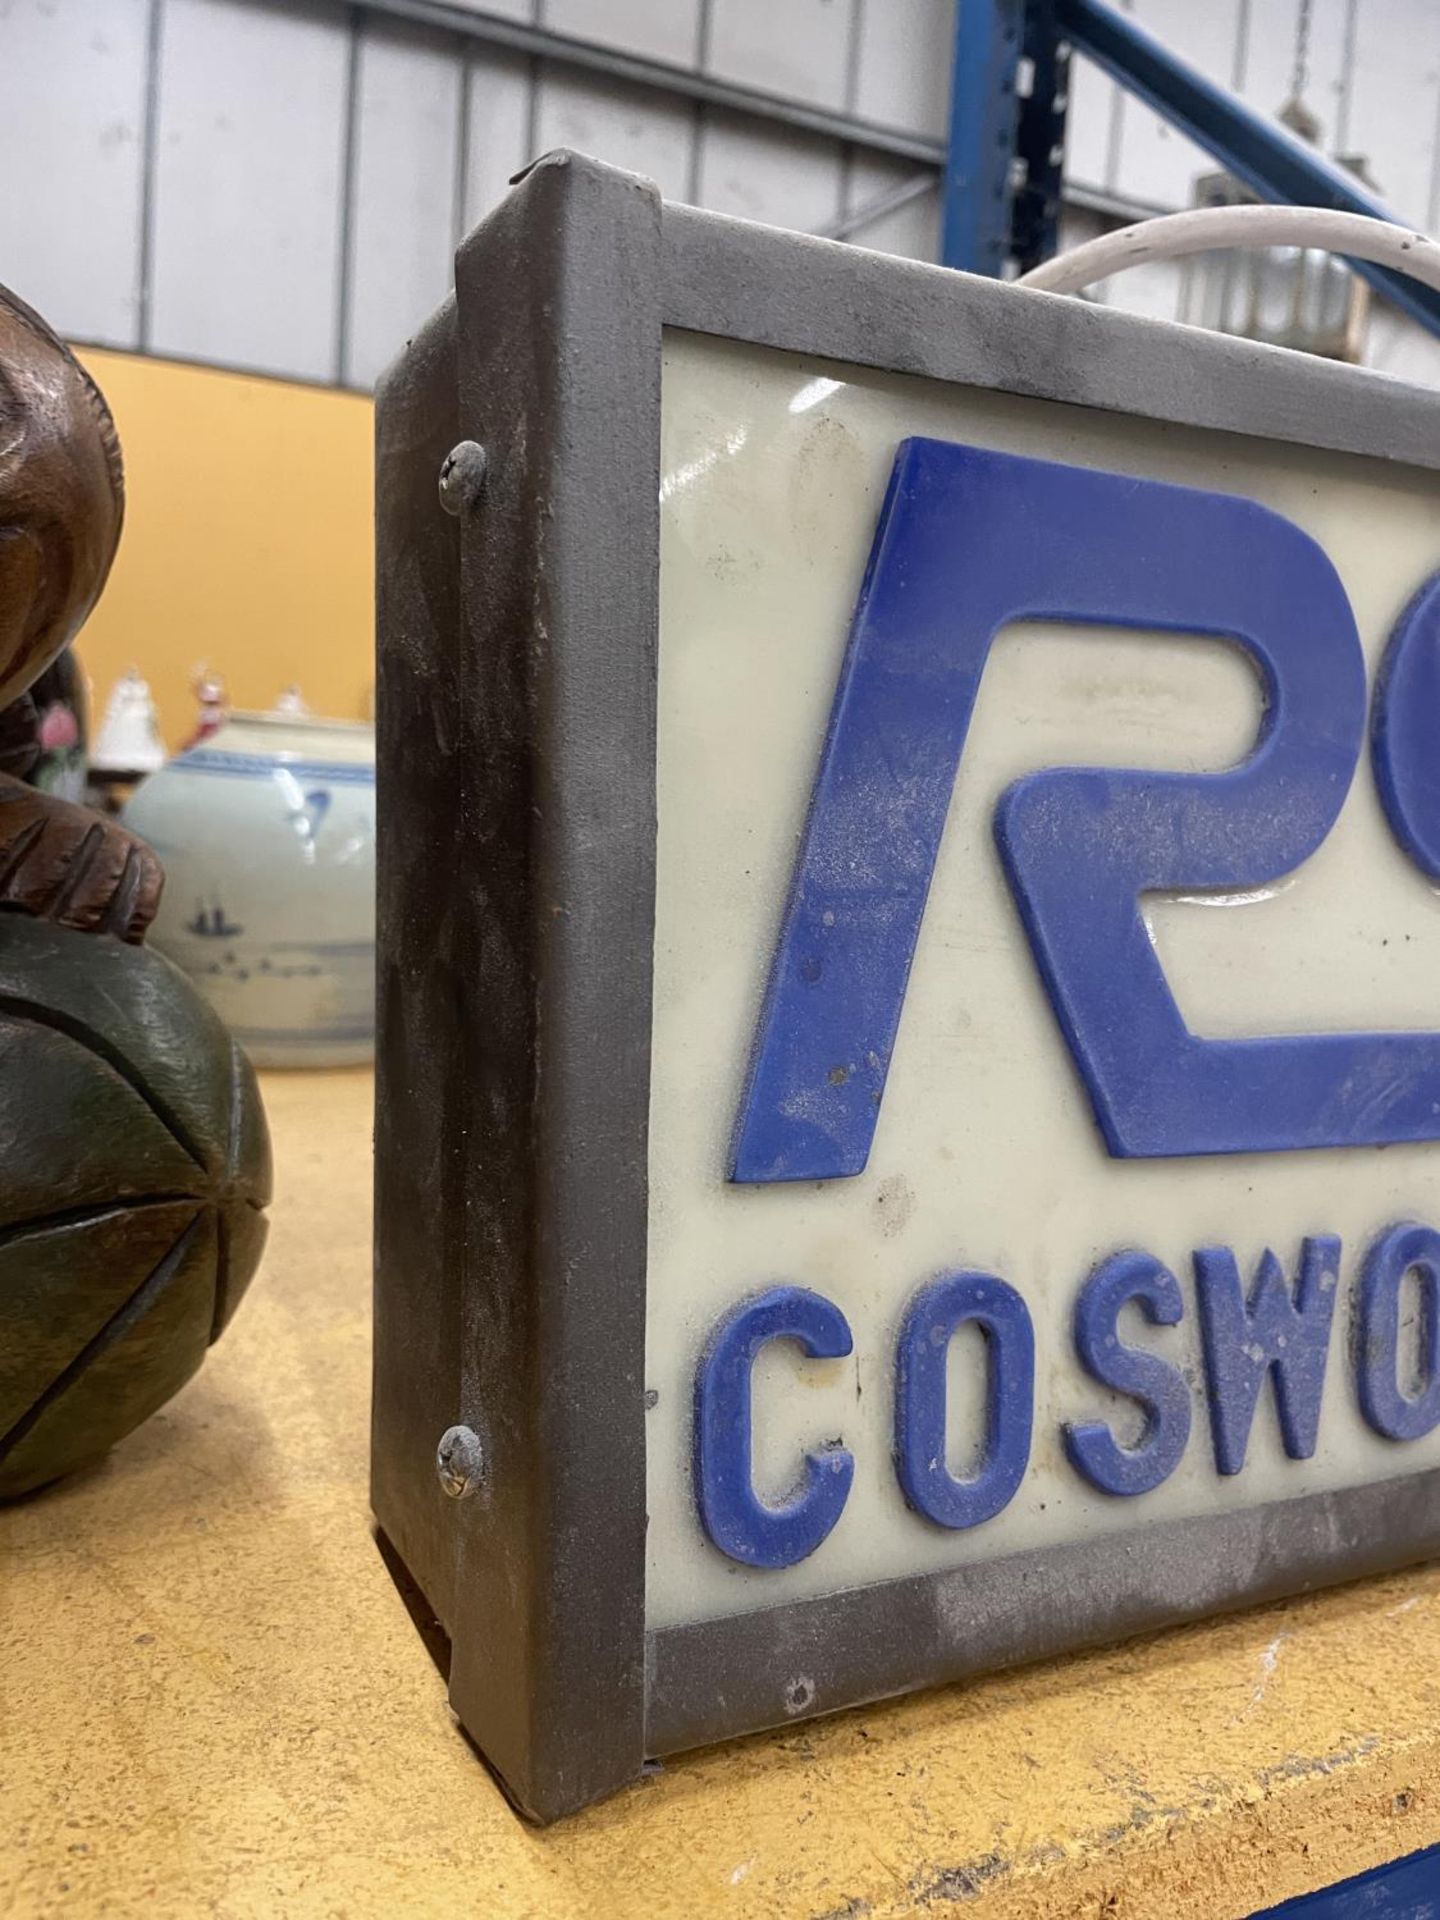 AN RS COSWORTH ILLUMINATED LIGHT BOX SIGN - Image 3 of 4